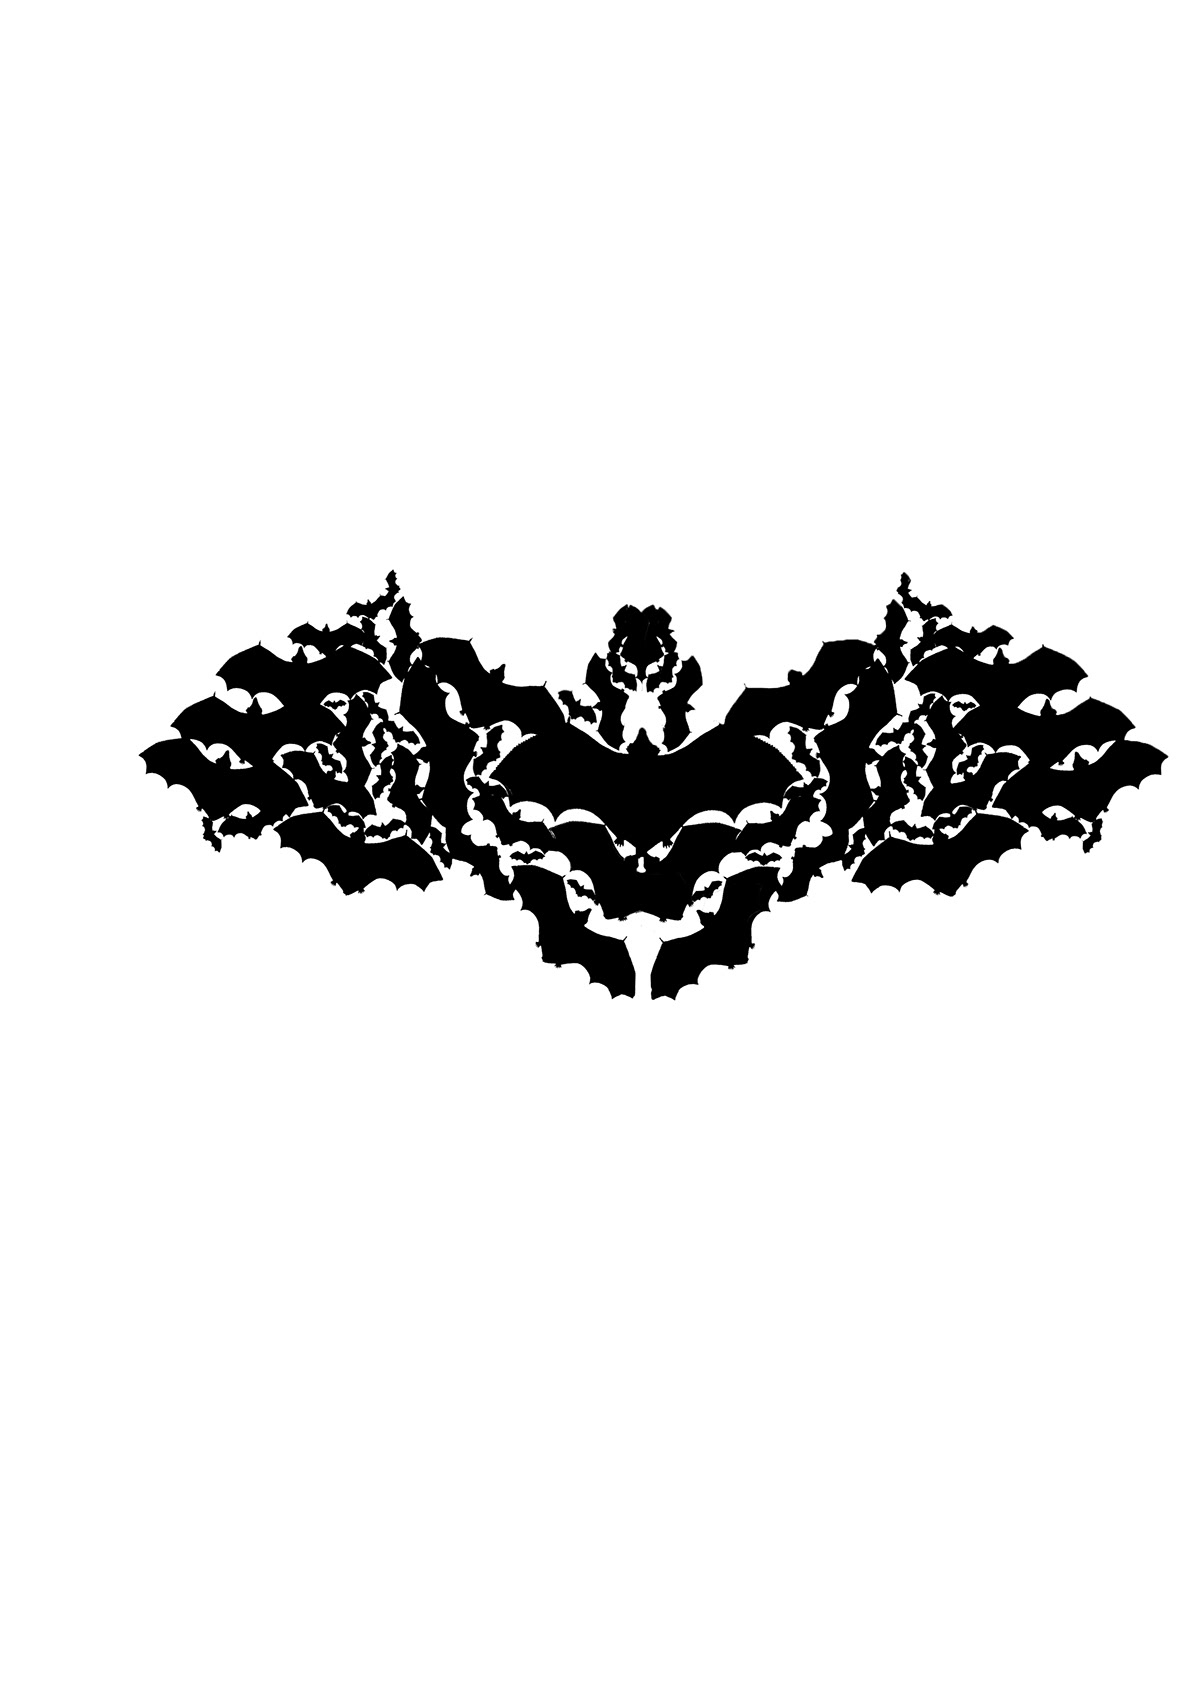 Horror Images horror characters wolf bat Werewolf blood print rorsach ink blot reflection